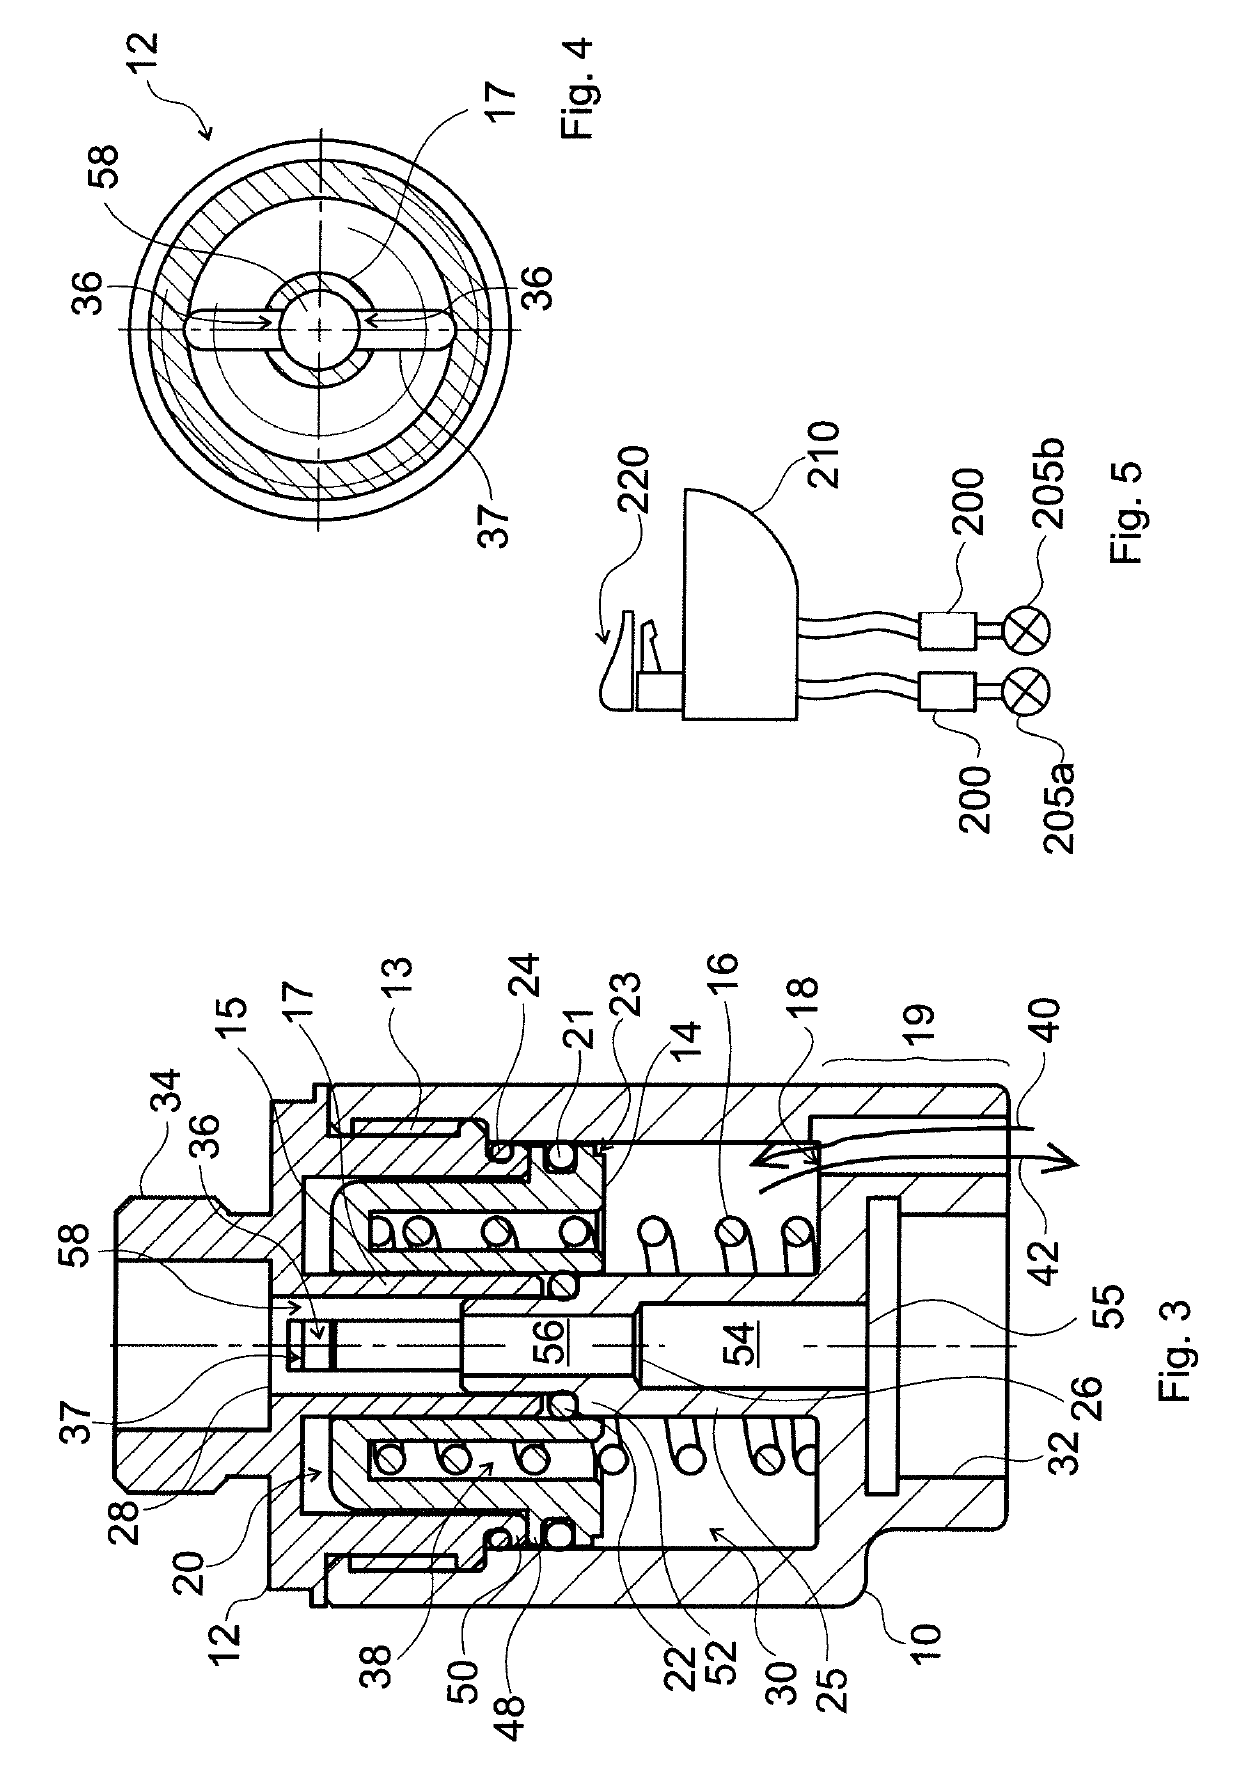 Device For Reducing Pressure Surge